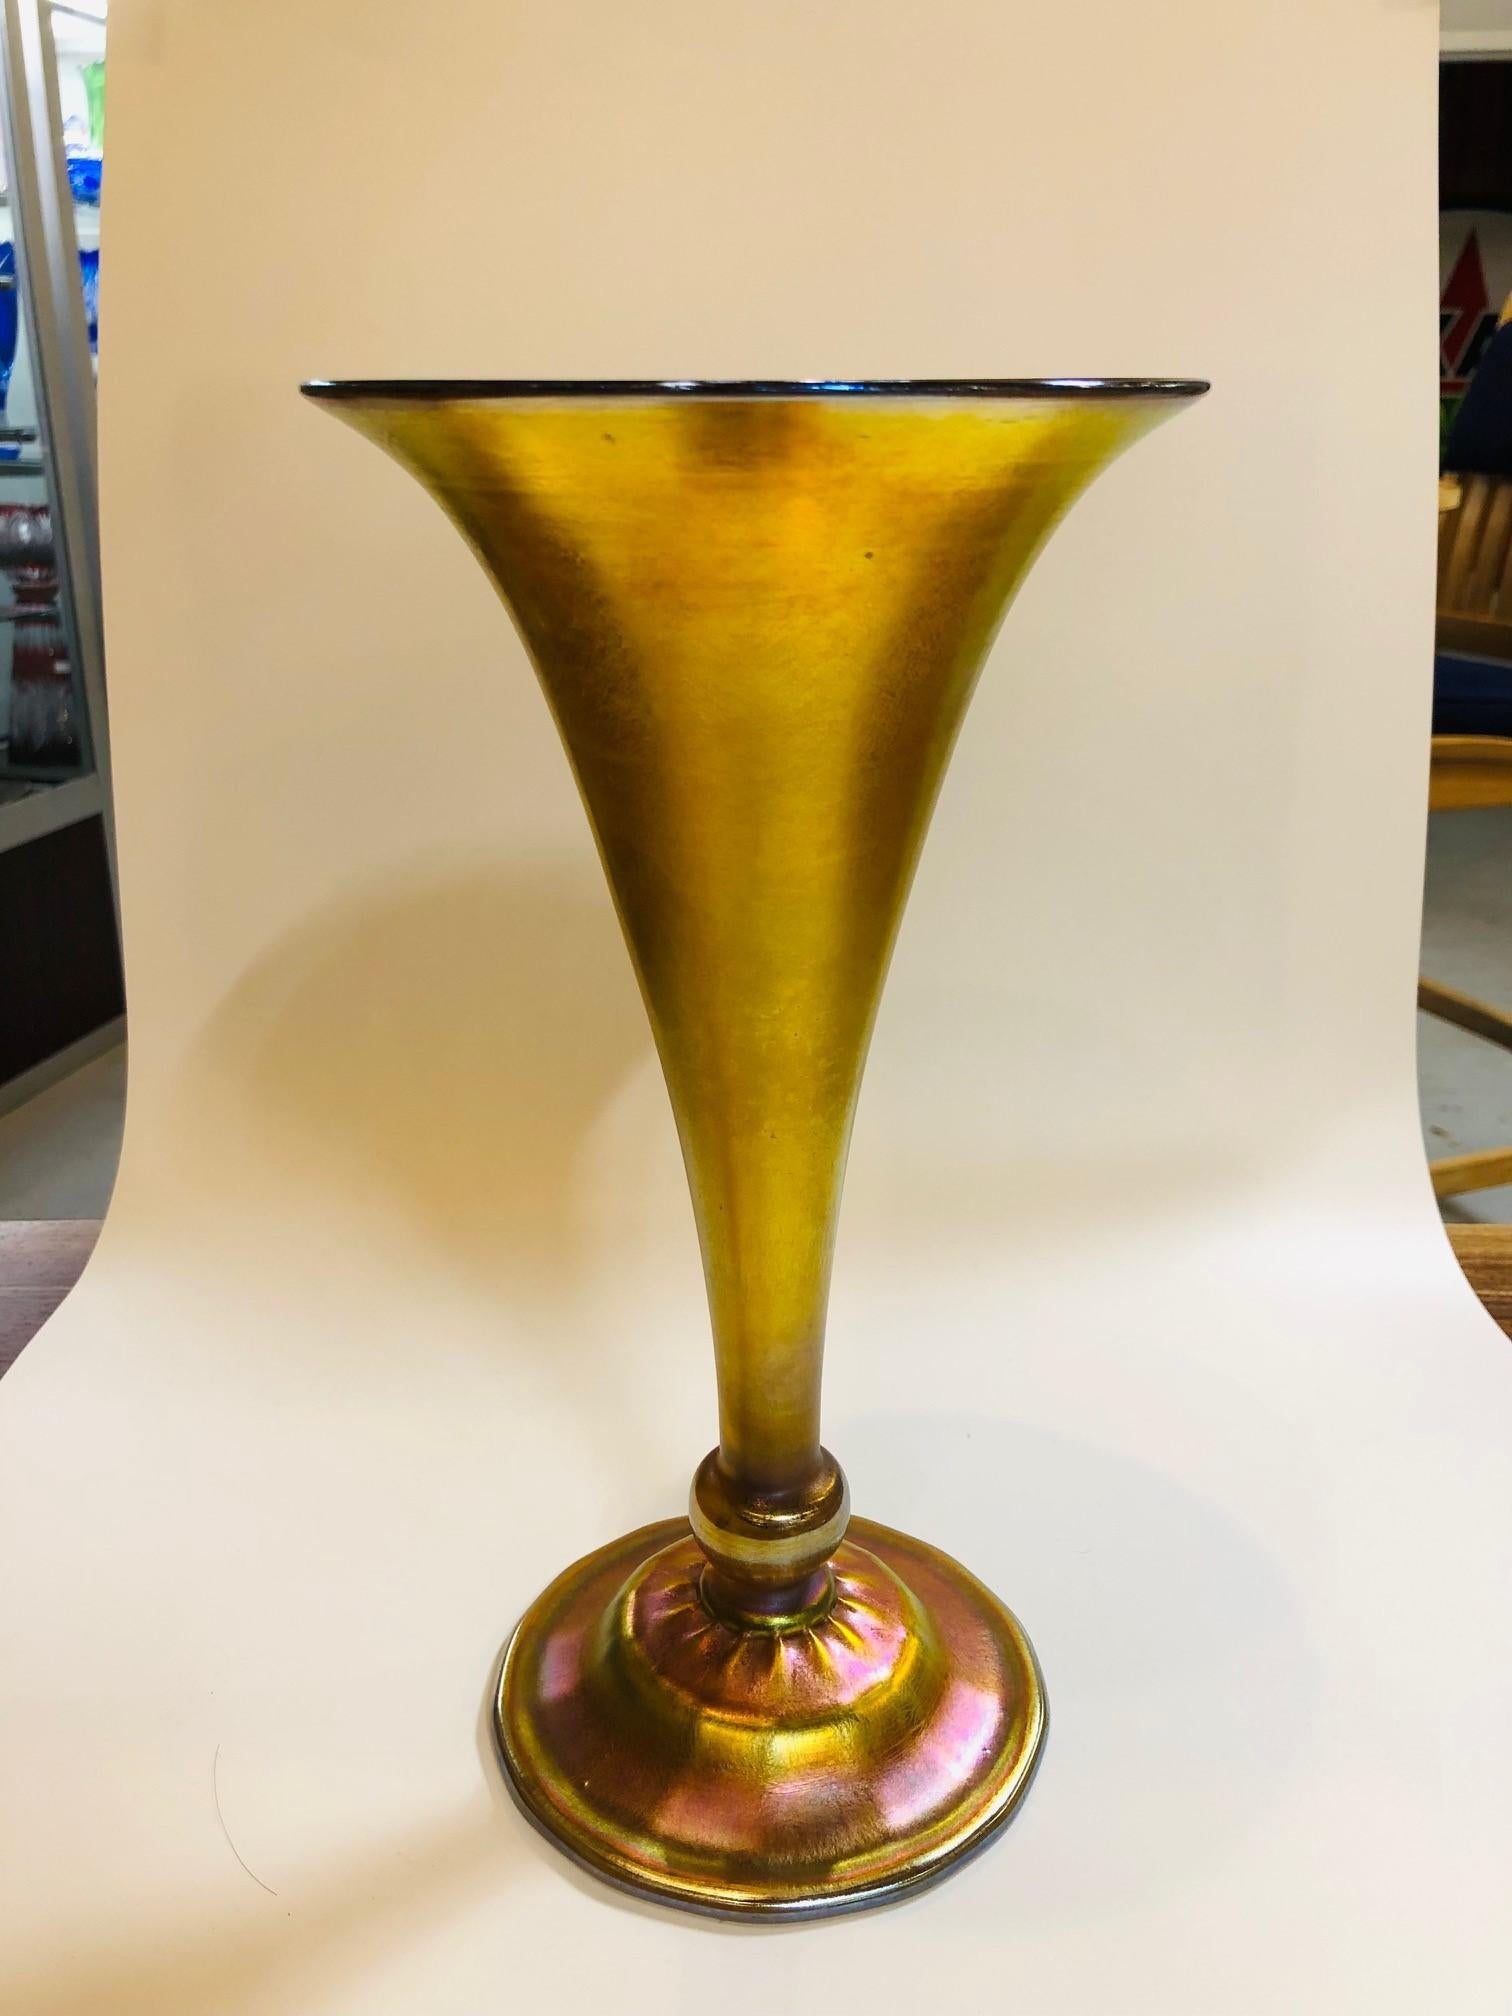 Original signed Louis Comfort Tiffany Trumpet vase 6292 art glass vase in great condition mid 20th century. This is a gorgeous Art Nouveau L.C. Tiffany trumpet vase it has many beautiful colors. The colors of this trumpet vase resemble a majestic